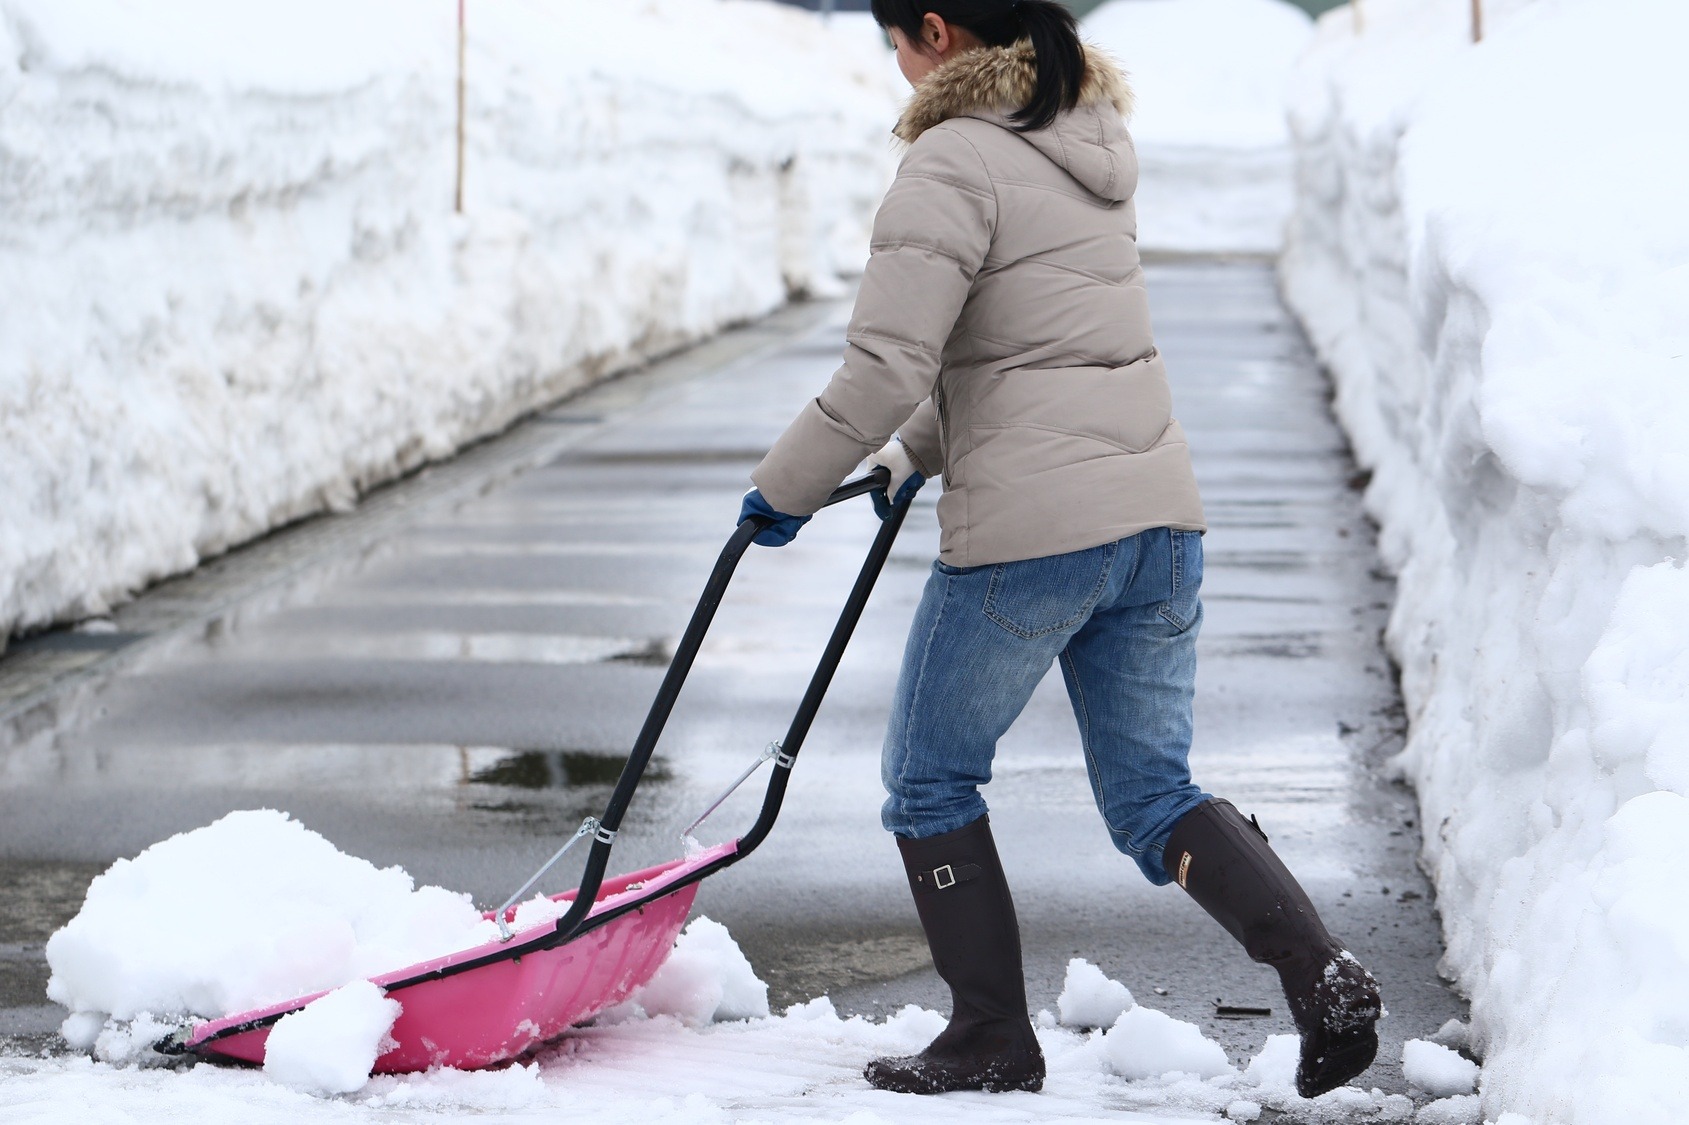 Put Injuries On Ice With Shovel Safety Tips